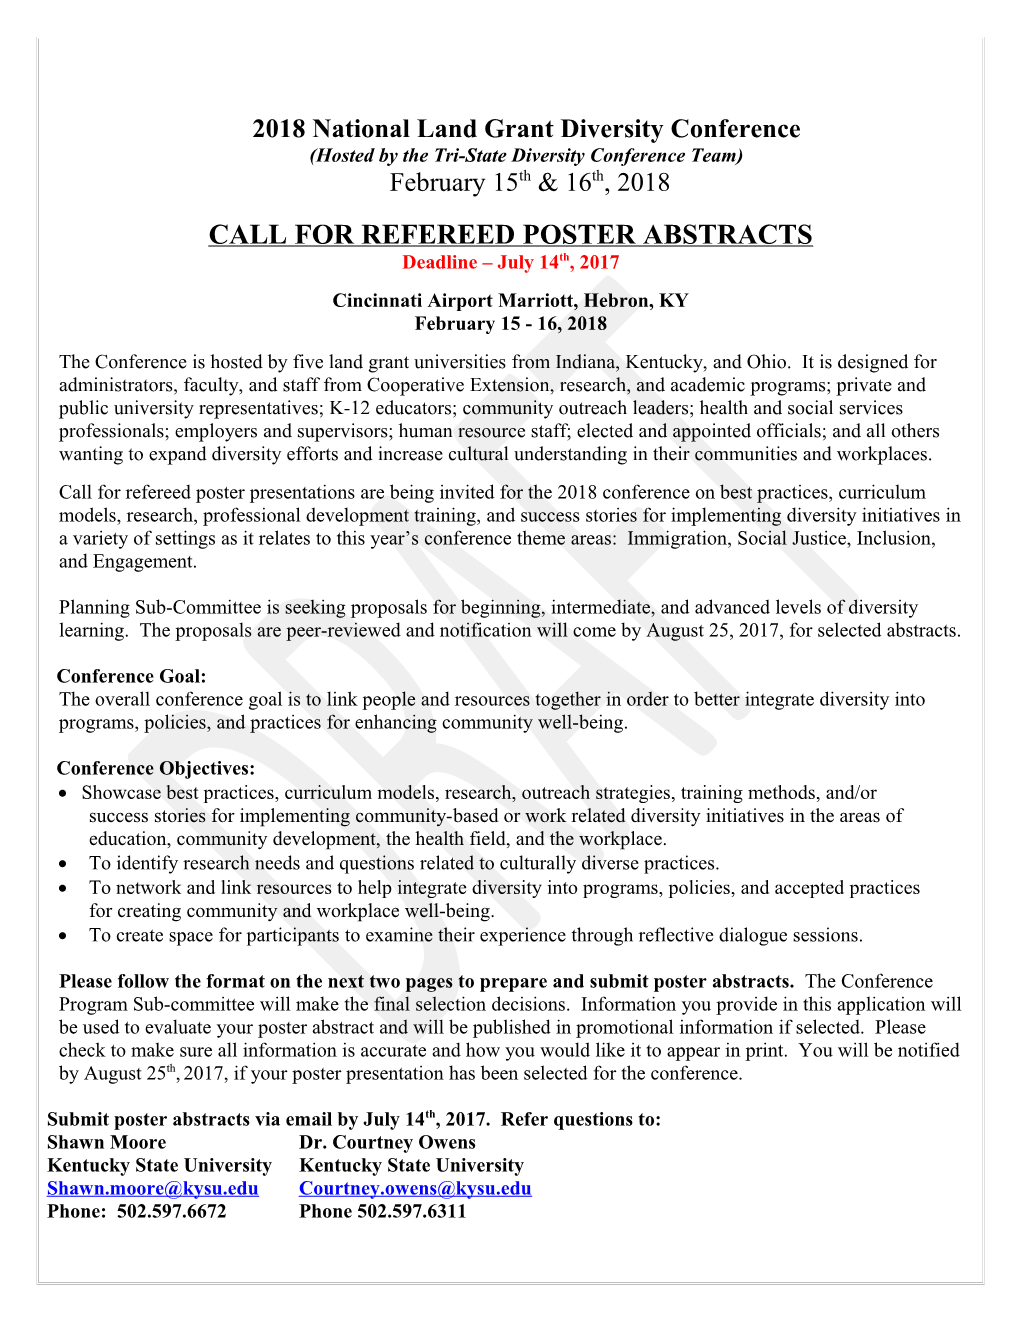 Call for Refereed Poster Abstracts